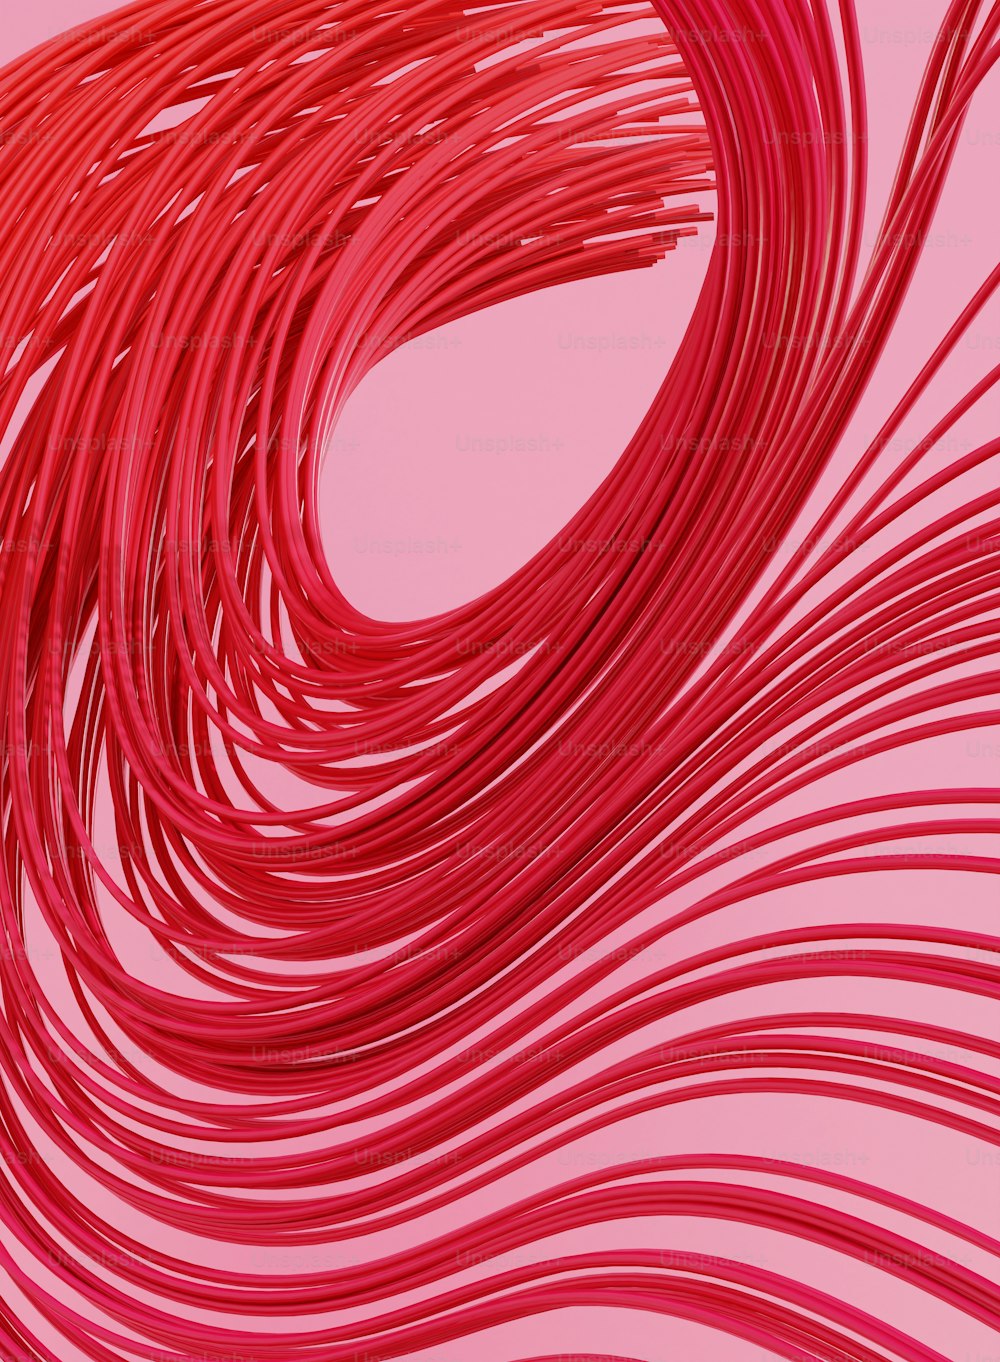 a bunch of red wires on a pink background